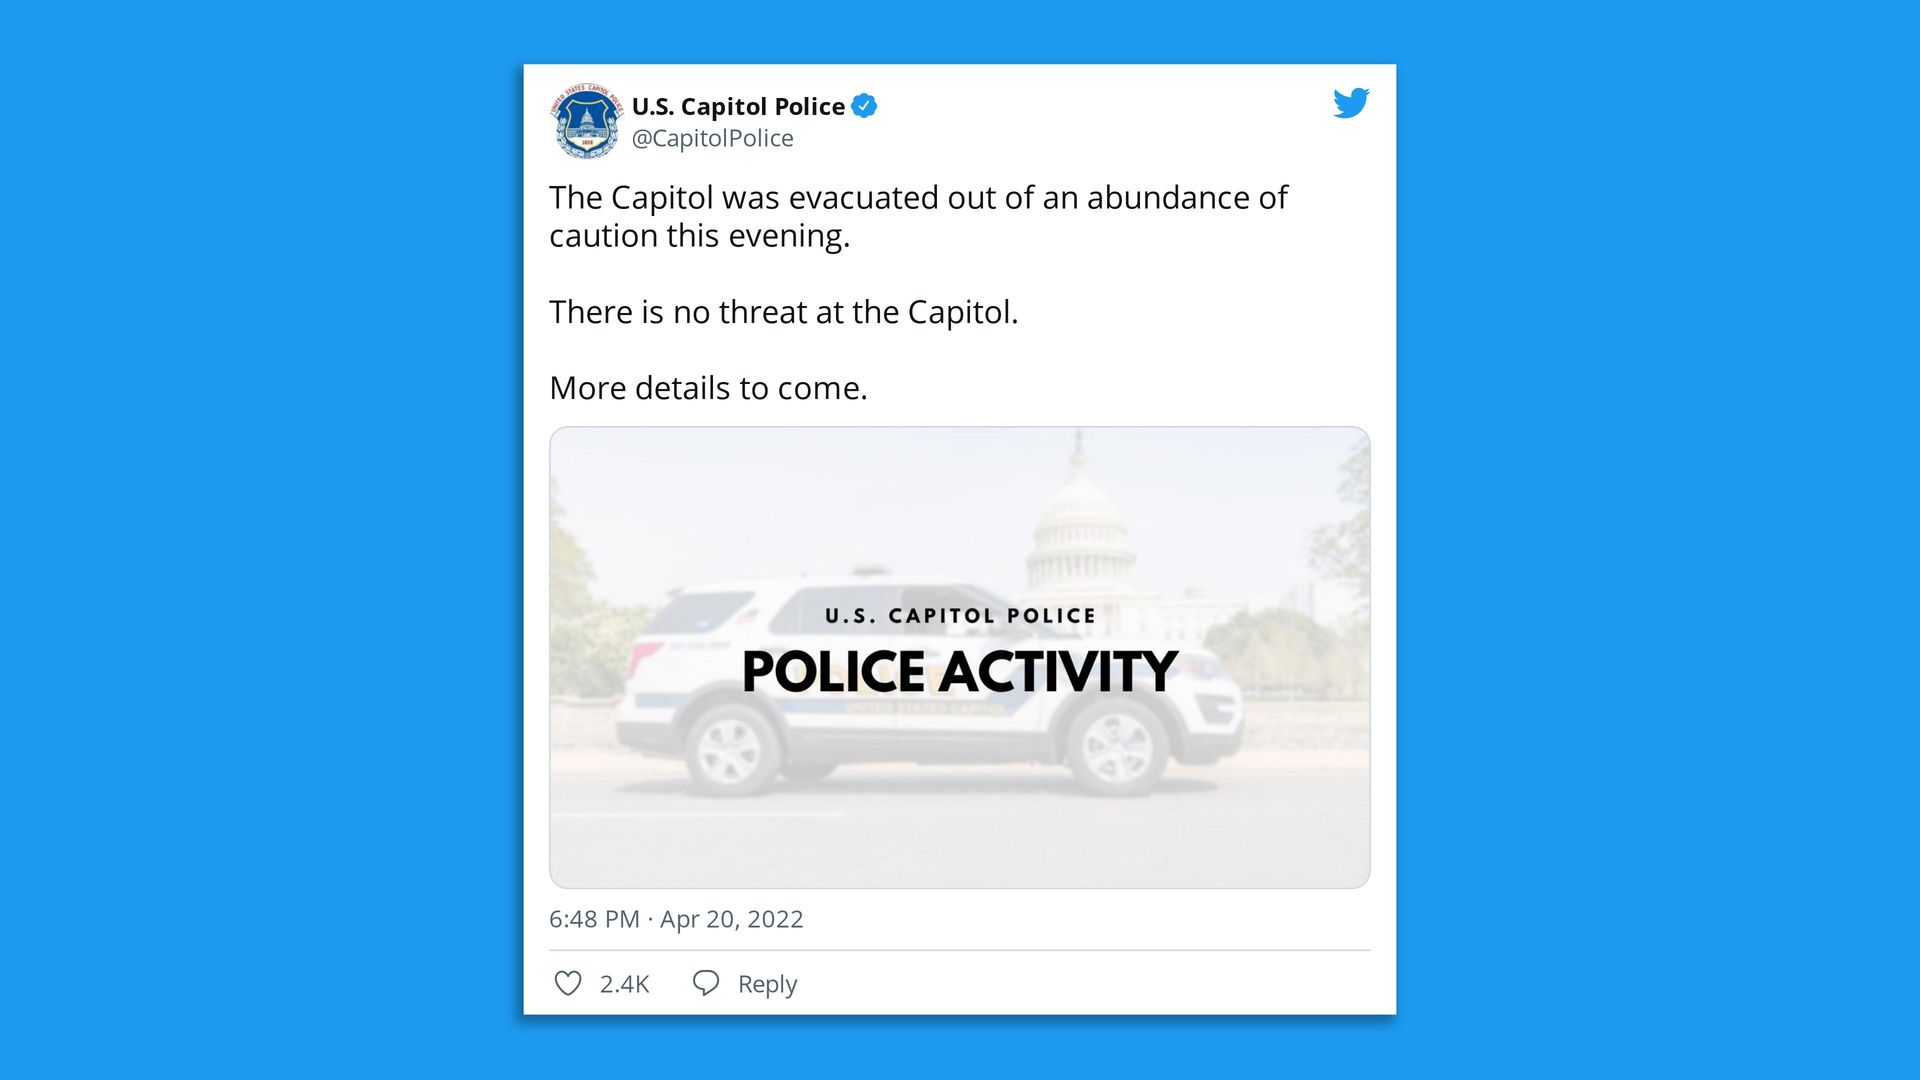 A tweet shows an alert from the U.S. Capitol Police.